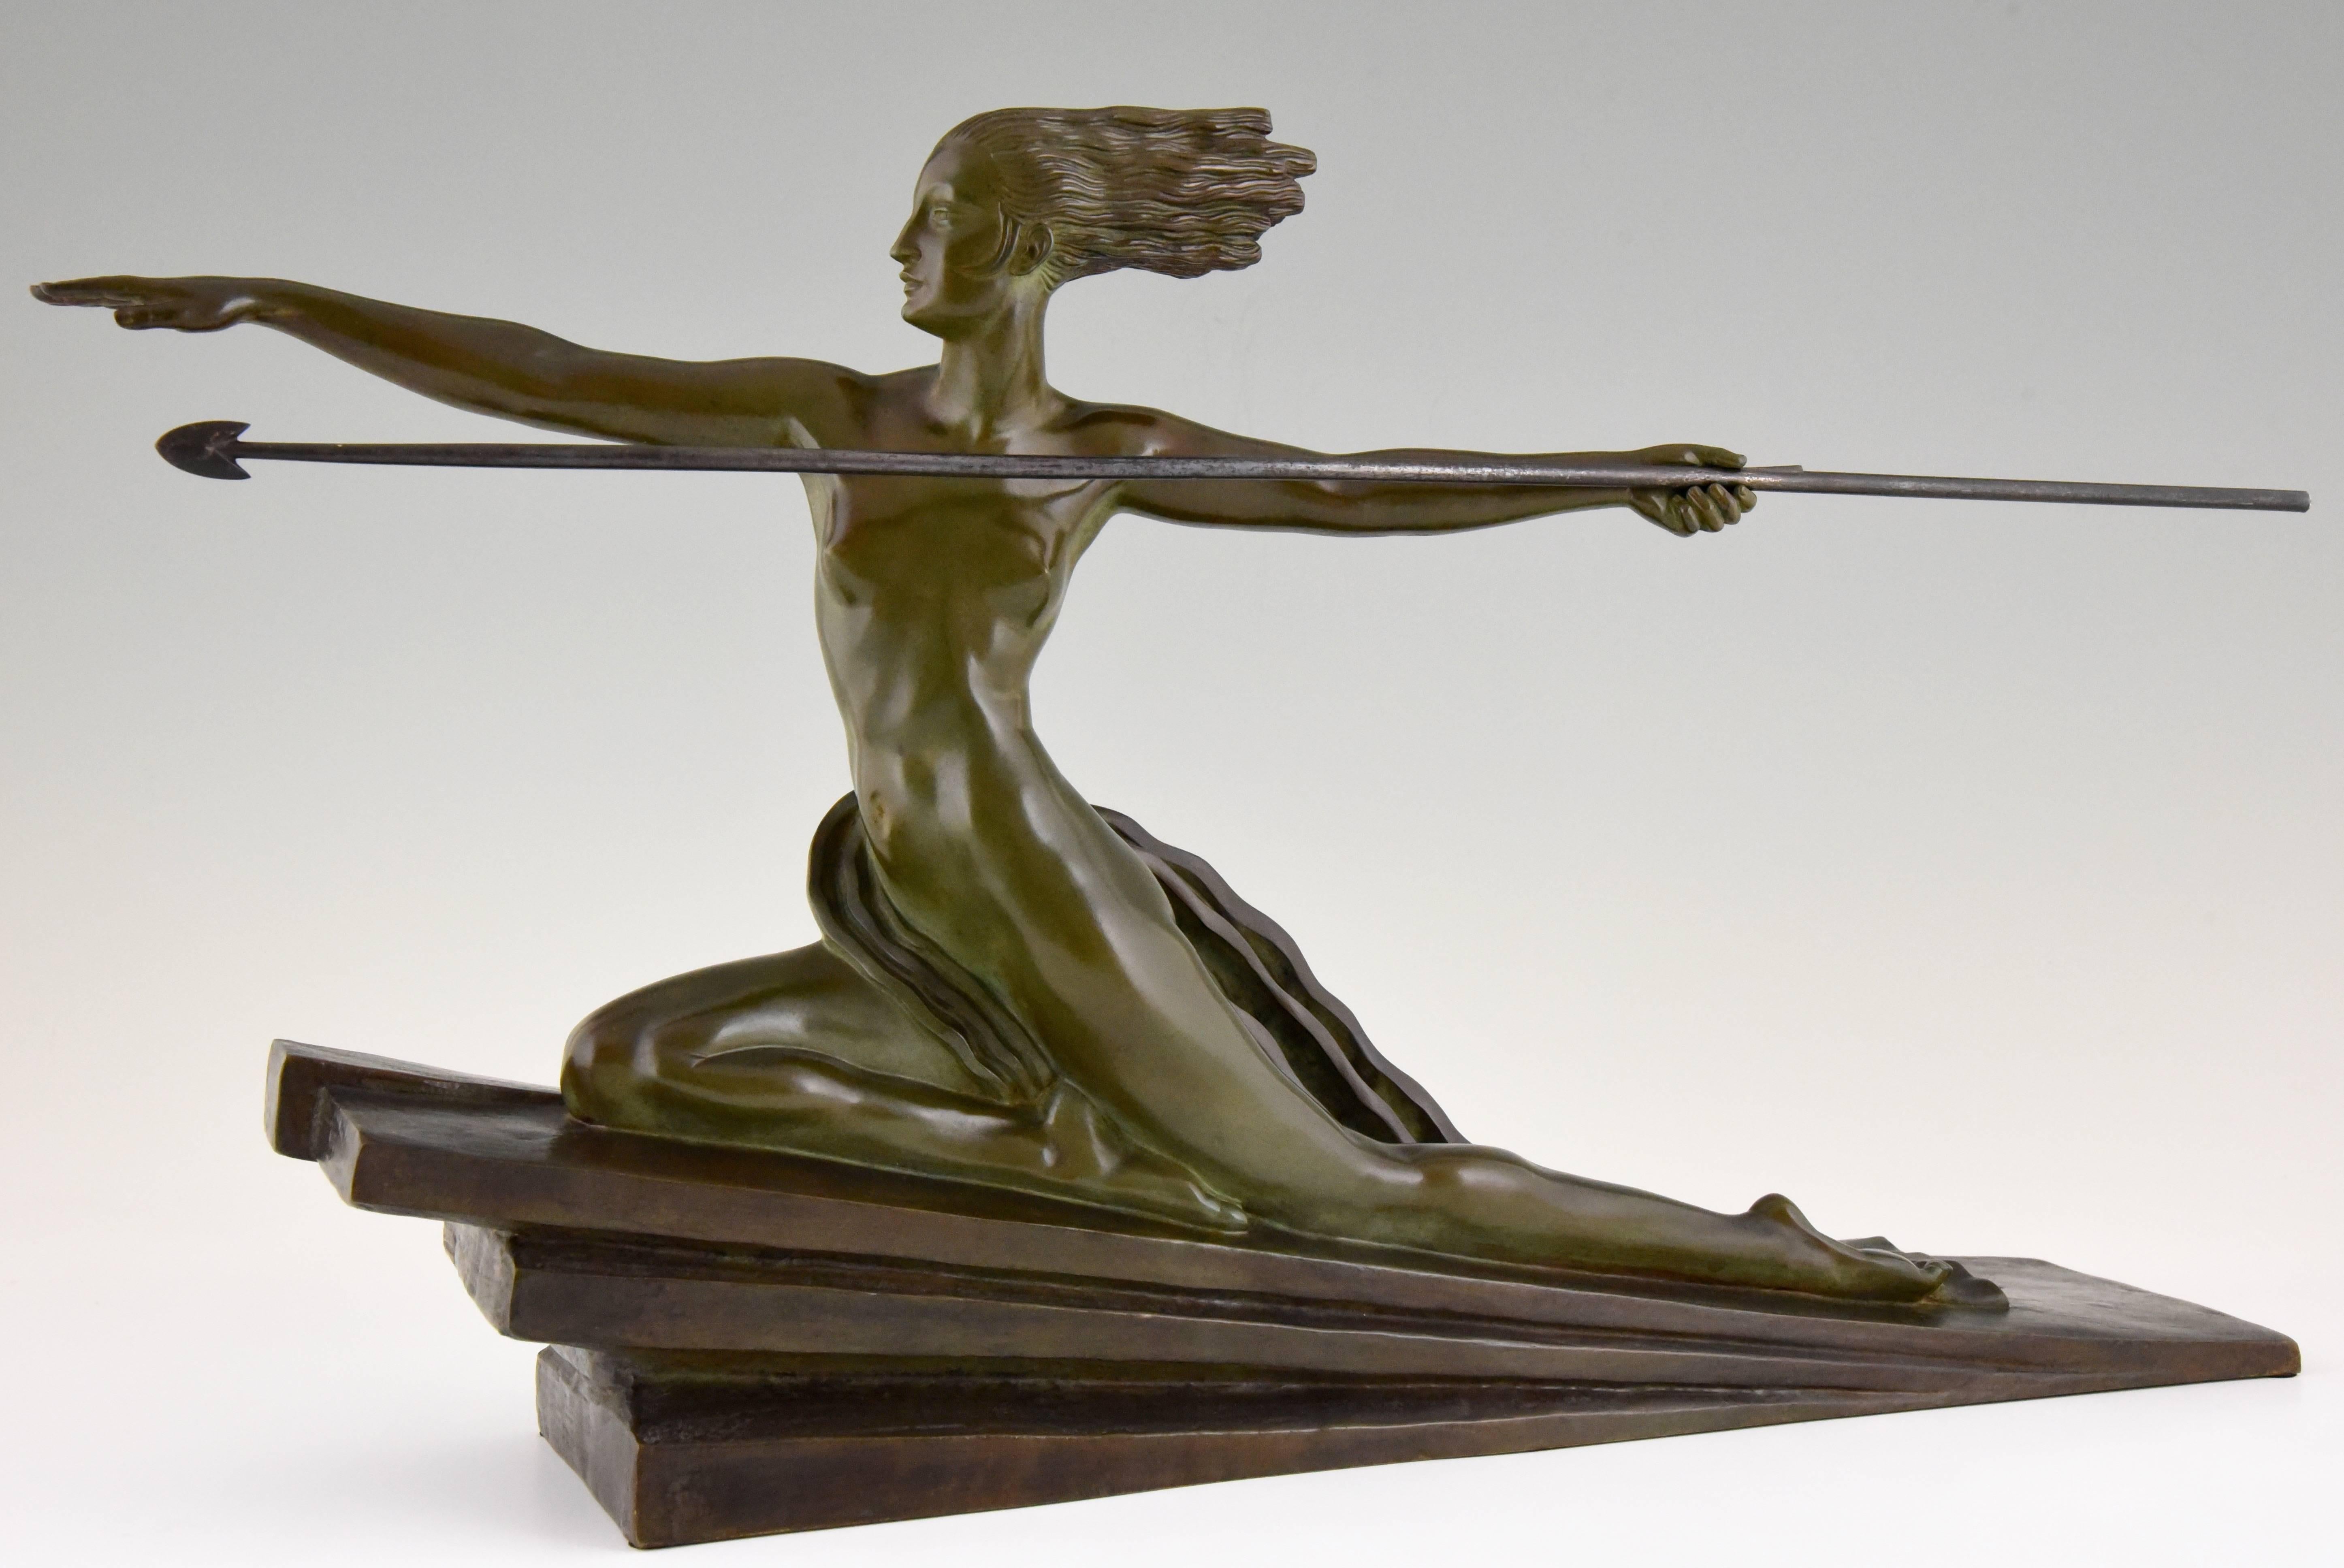 Amazon, beautiful Art Deco bronze sculpture of a female nude warrior with spear by Andre Marcel Bouraine cast by the Etling foundry in Paris. 

Signature/ Marks: Bouraine. Etling Paris, foundry mark. Bronze.
Style: Art Deco
Date: 1925
Material: